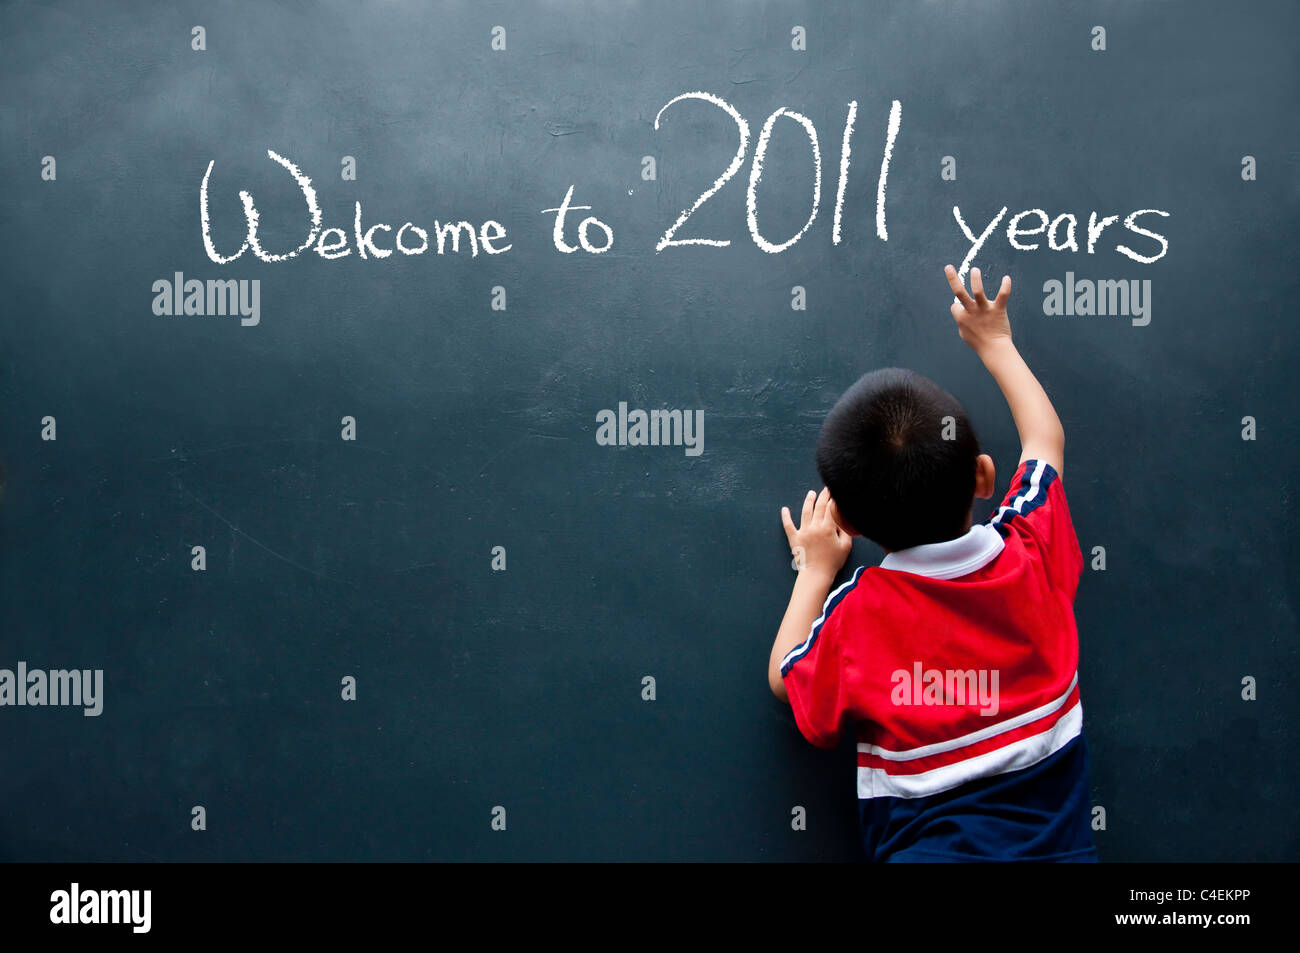 Welcome to 2011 years Stock Photo